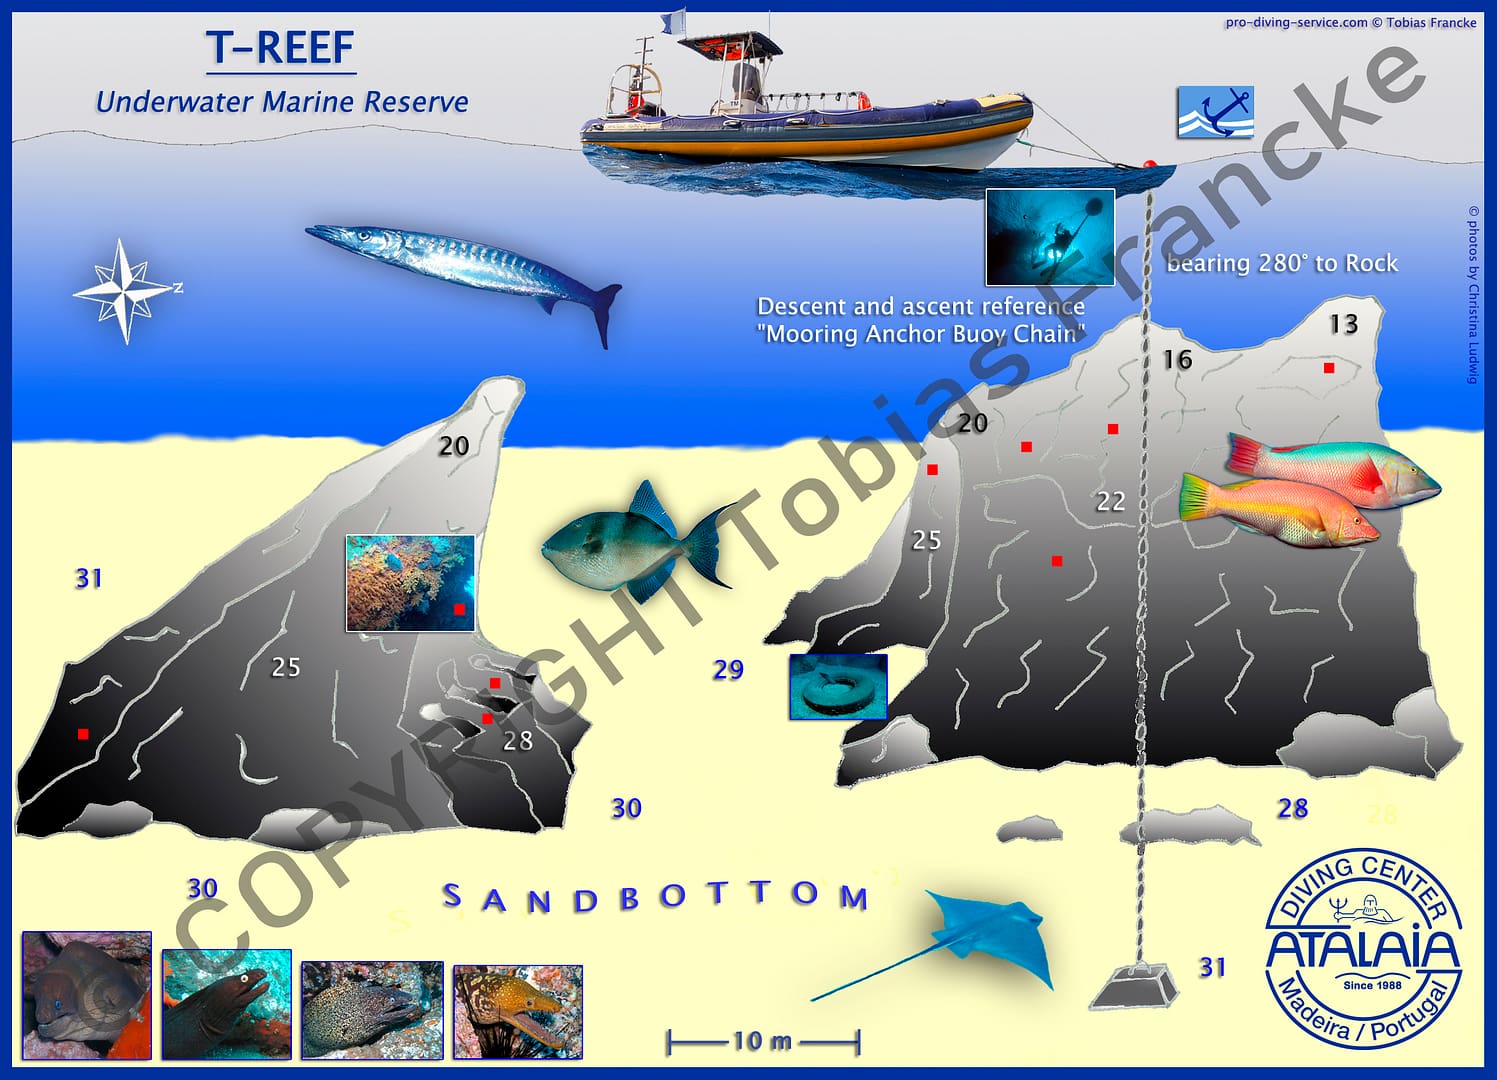 T-Reef_ADC_Copyright_800